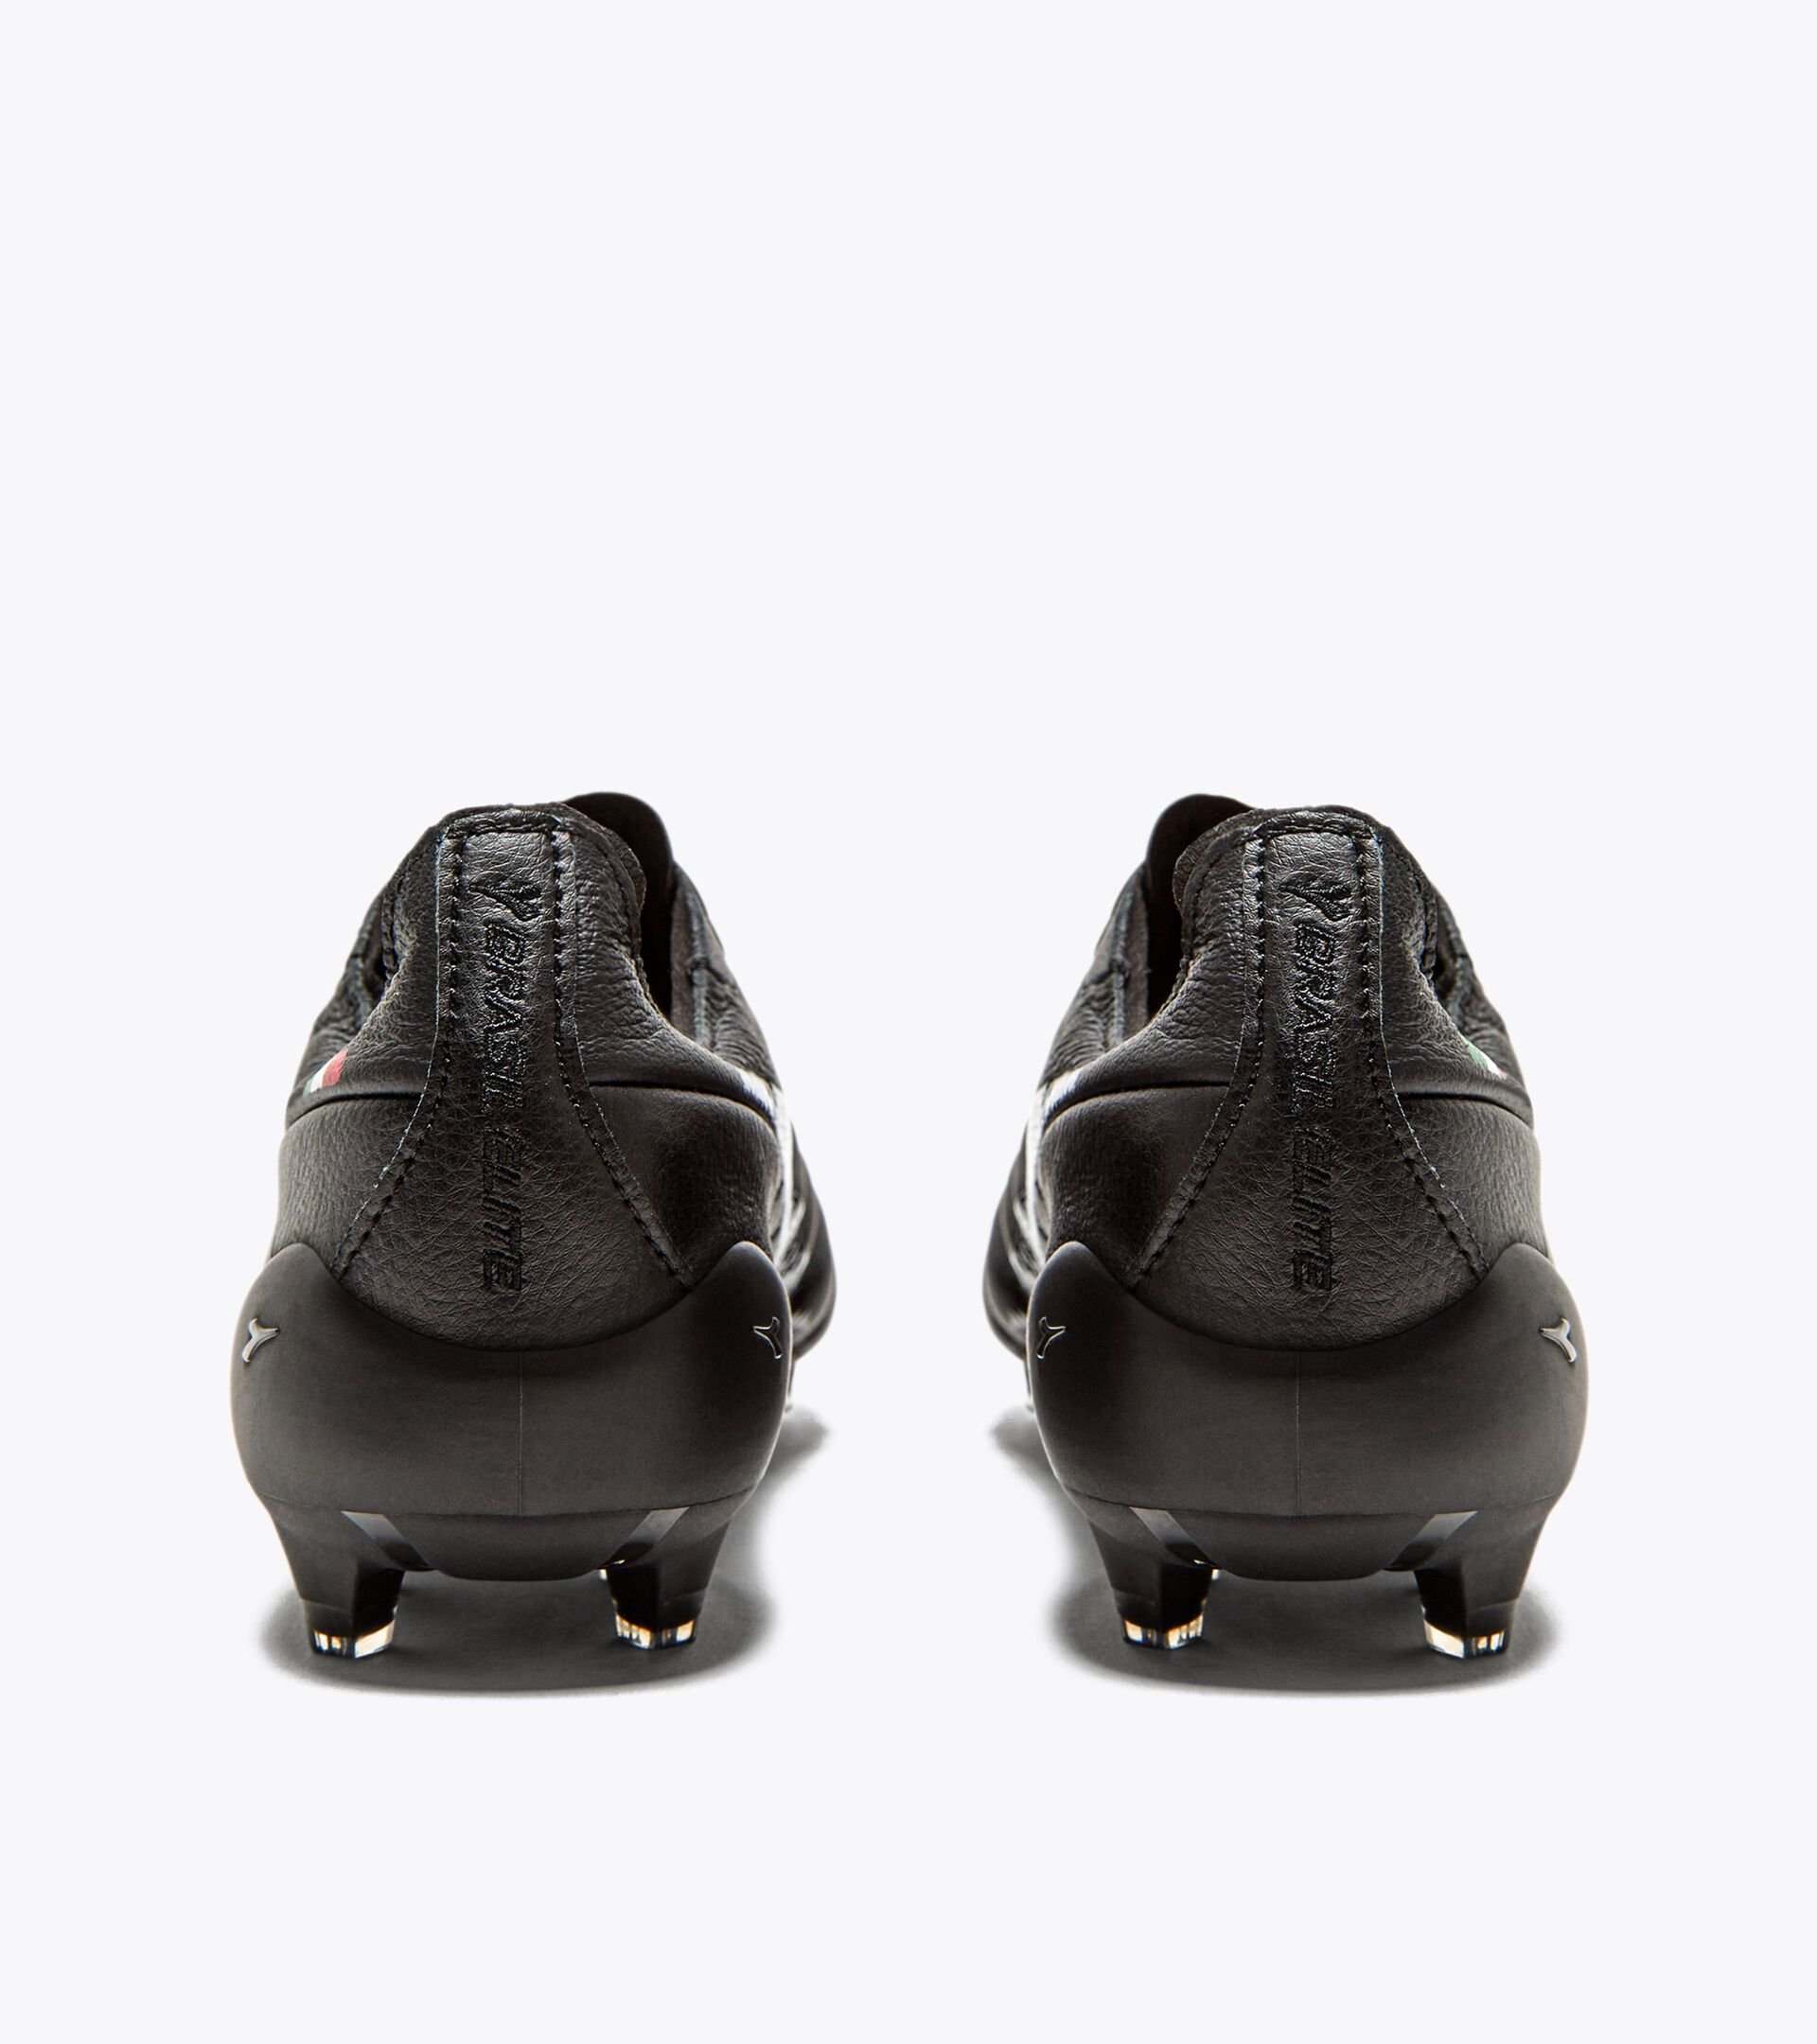 Firm ground and synthetic pitches football boots - Made in Italy BRASIL ELITE2 TECH ITA LPX BLACK - Diadora